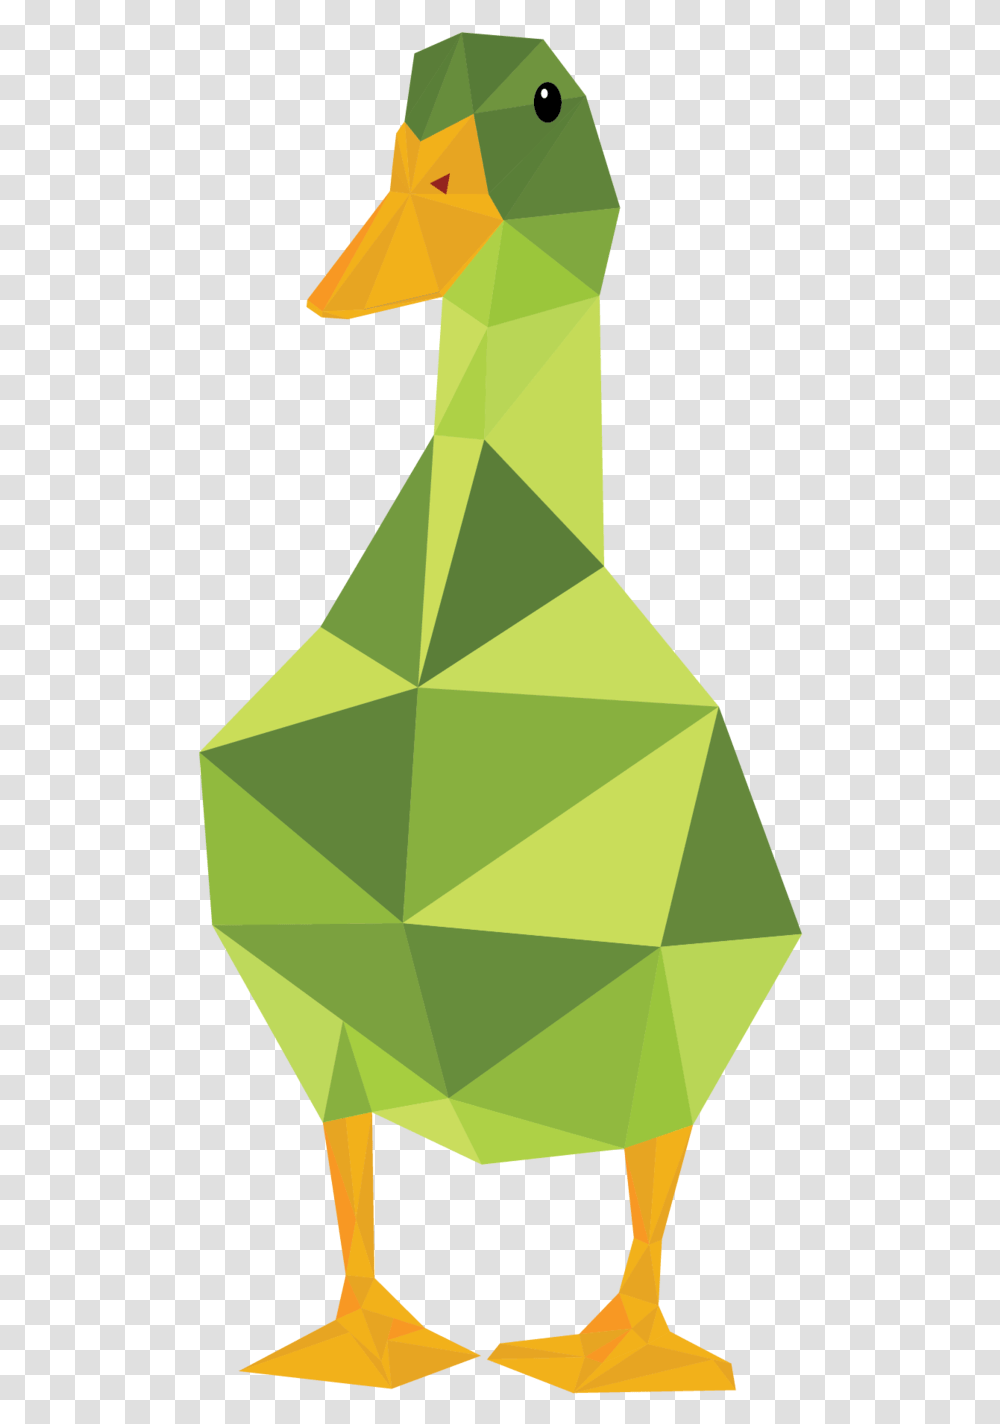 Duckduckgoose 03 Duck, Triangle, Leaf, Plant, Cone Transparent Png